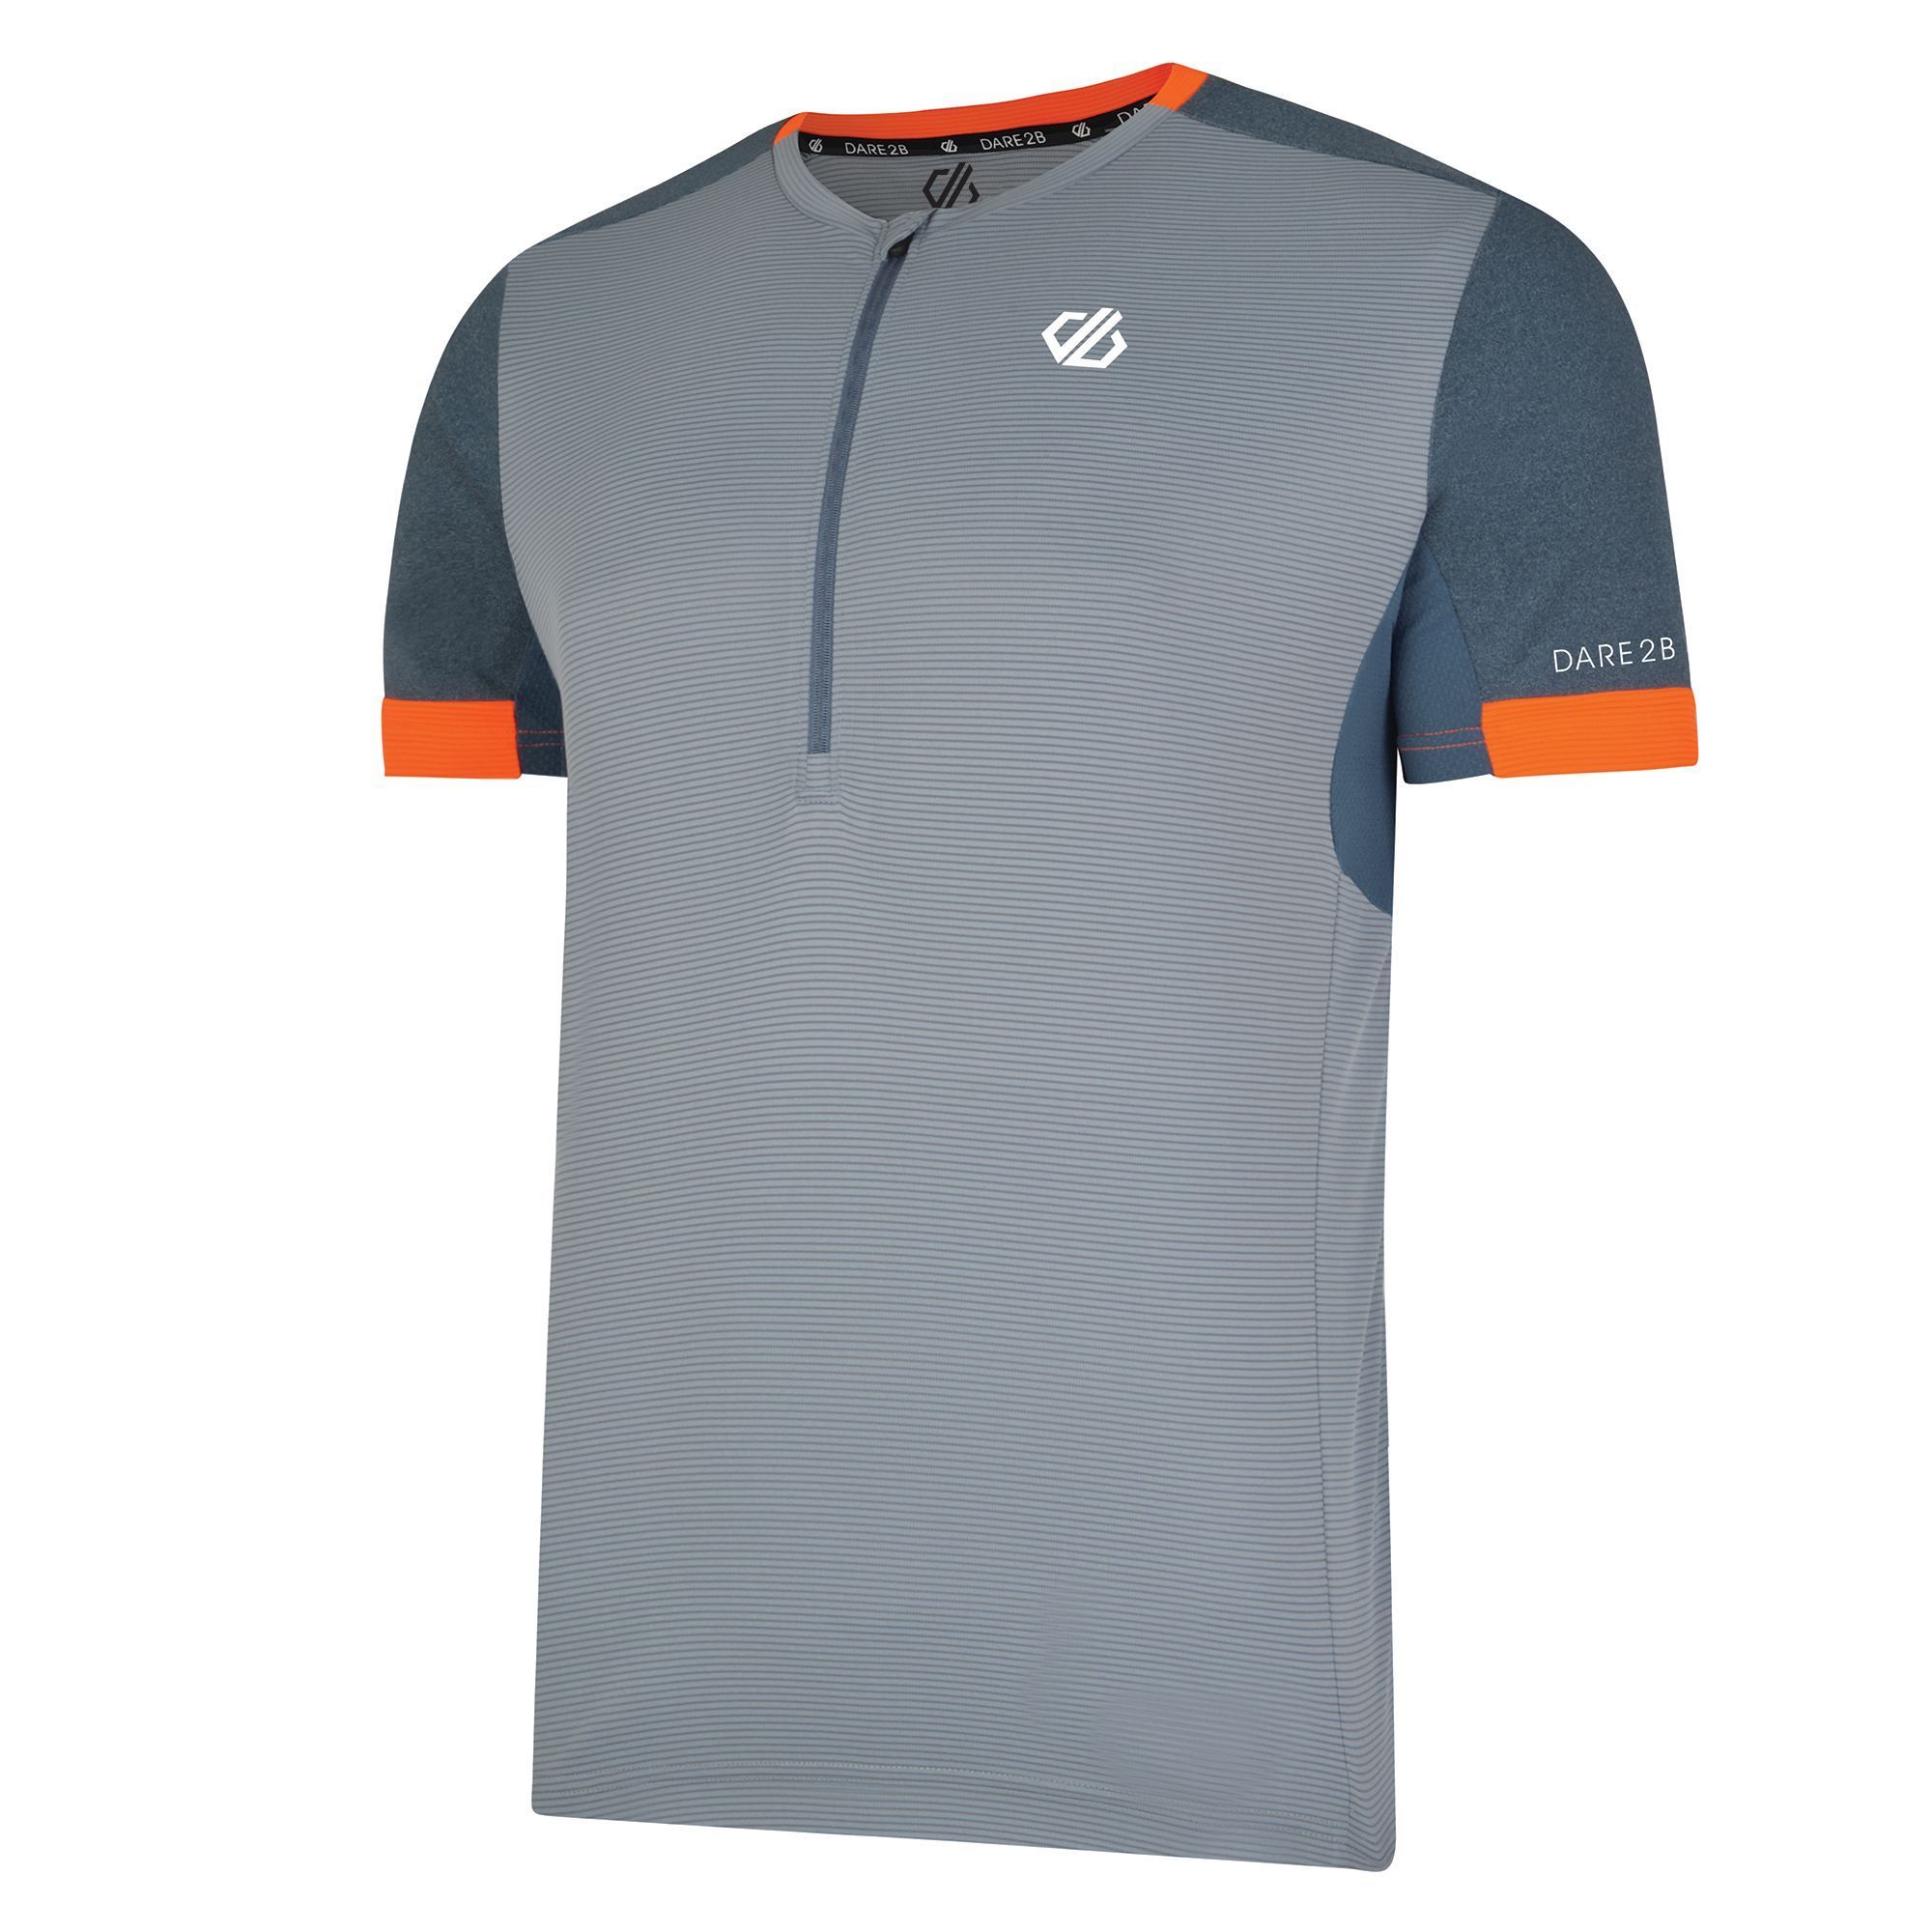 Q-Wic Plus lightweight 100% polyester fabric.  odour control treatment. Good wicking performance. Quick drying. 1/2 length centre front venting zip with autolock slider & inner zip guard. Mesh venting zones. 1 x security pocket with invisible zip. Reflective detail for enhanced visibility.